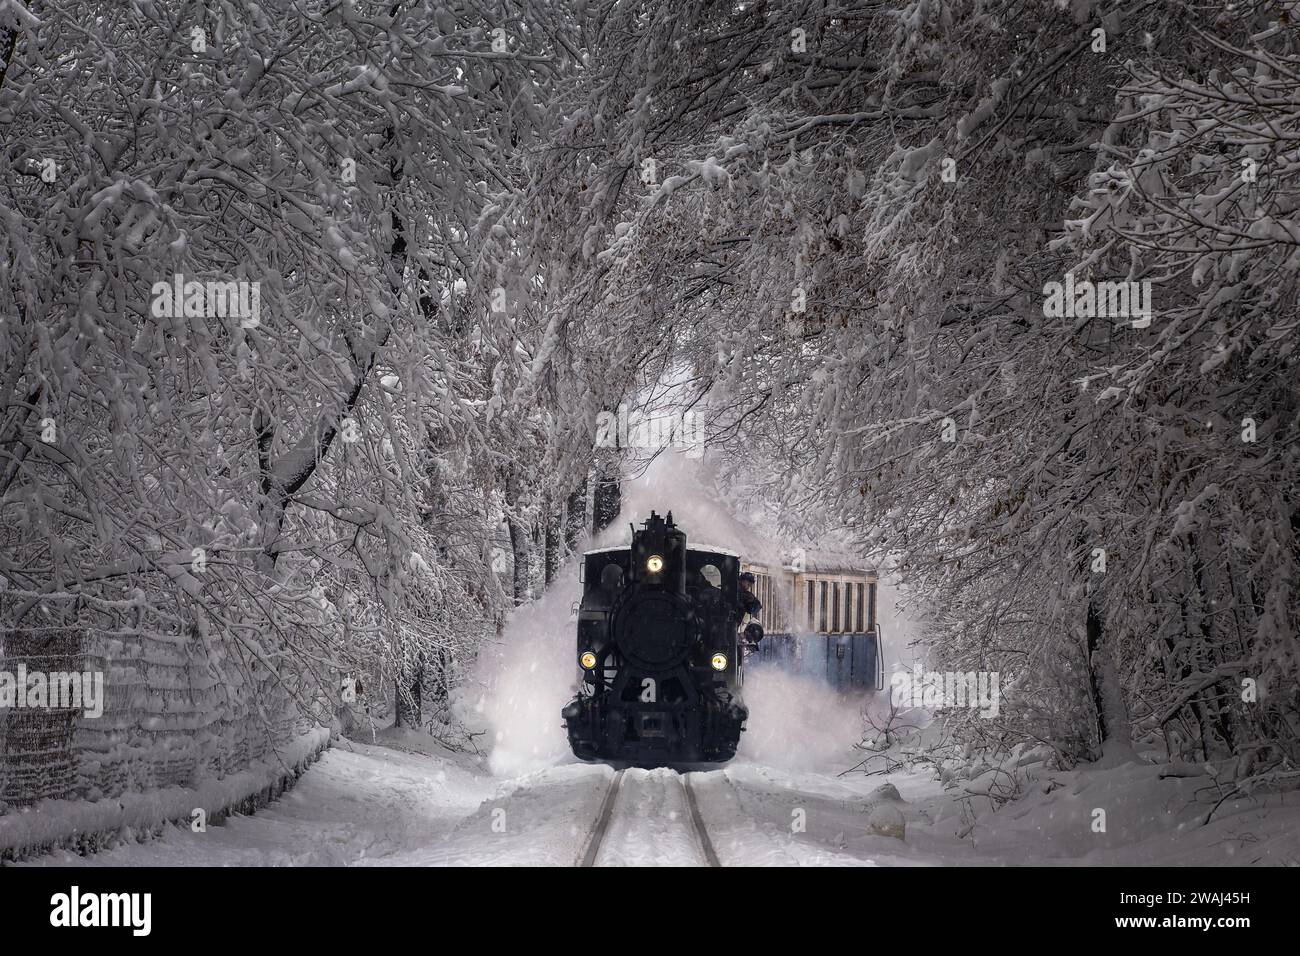 Budapest, Hungary - Beautiful winter forest scene with snowing, snowy forest and old nostalgic tank engine (children's train) on the track in the Buda Stock Photo